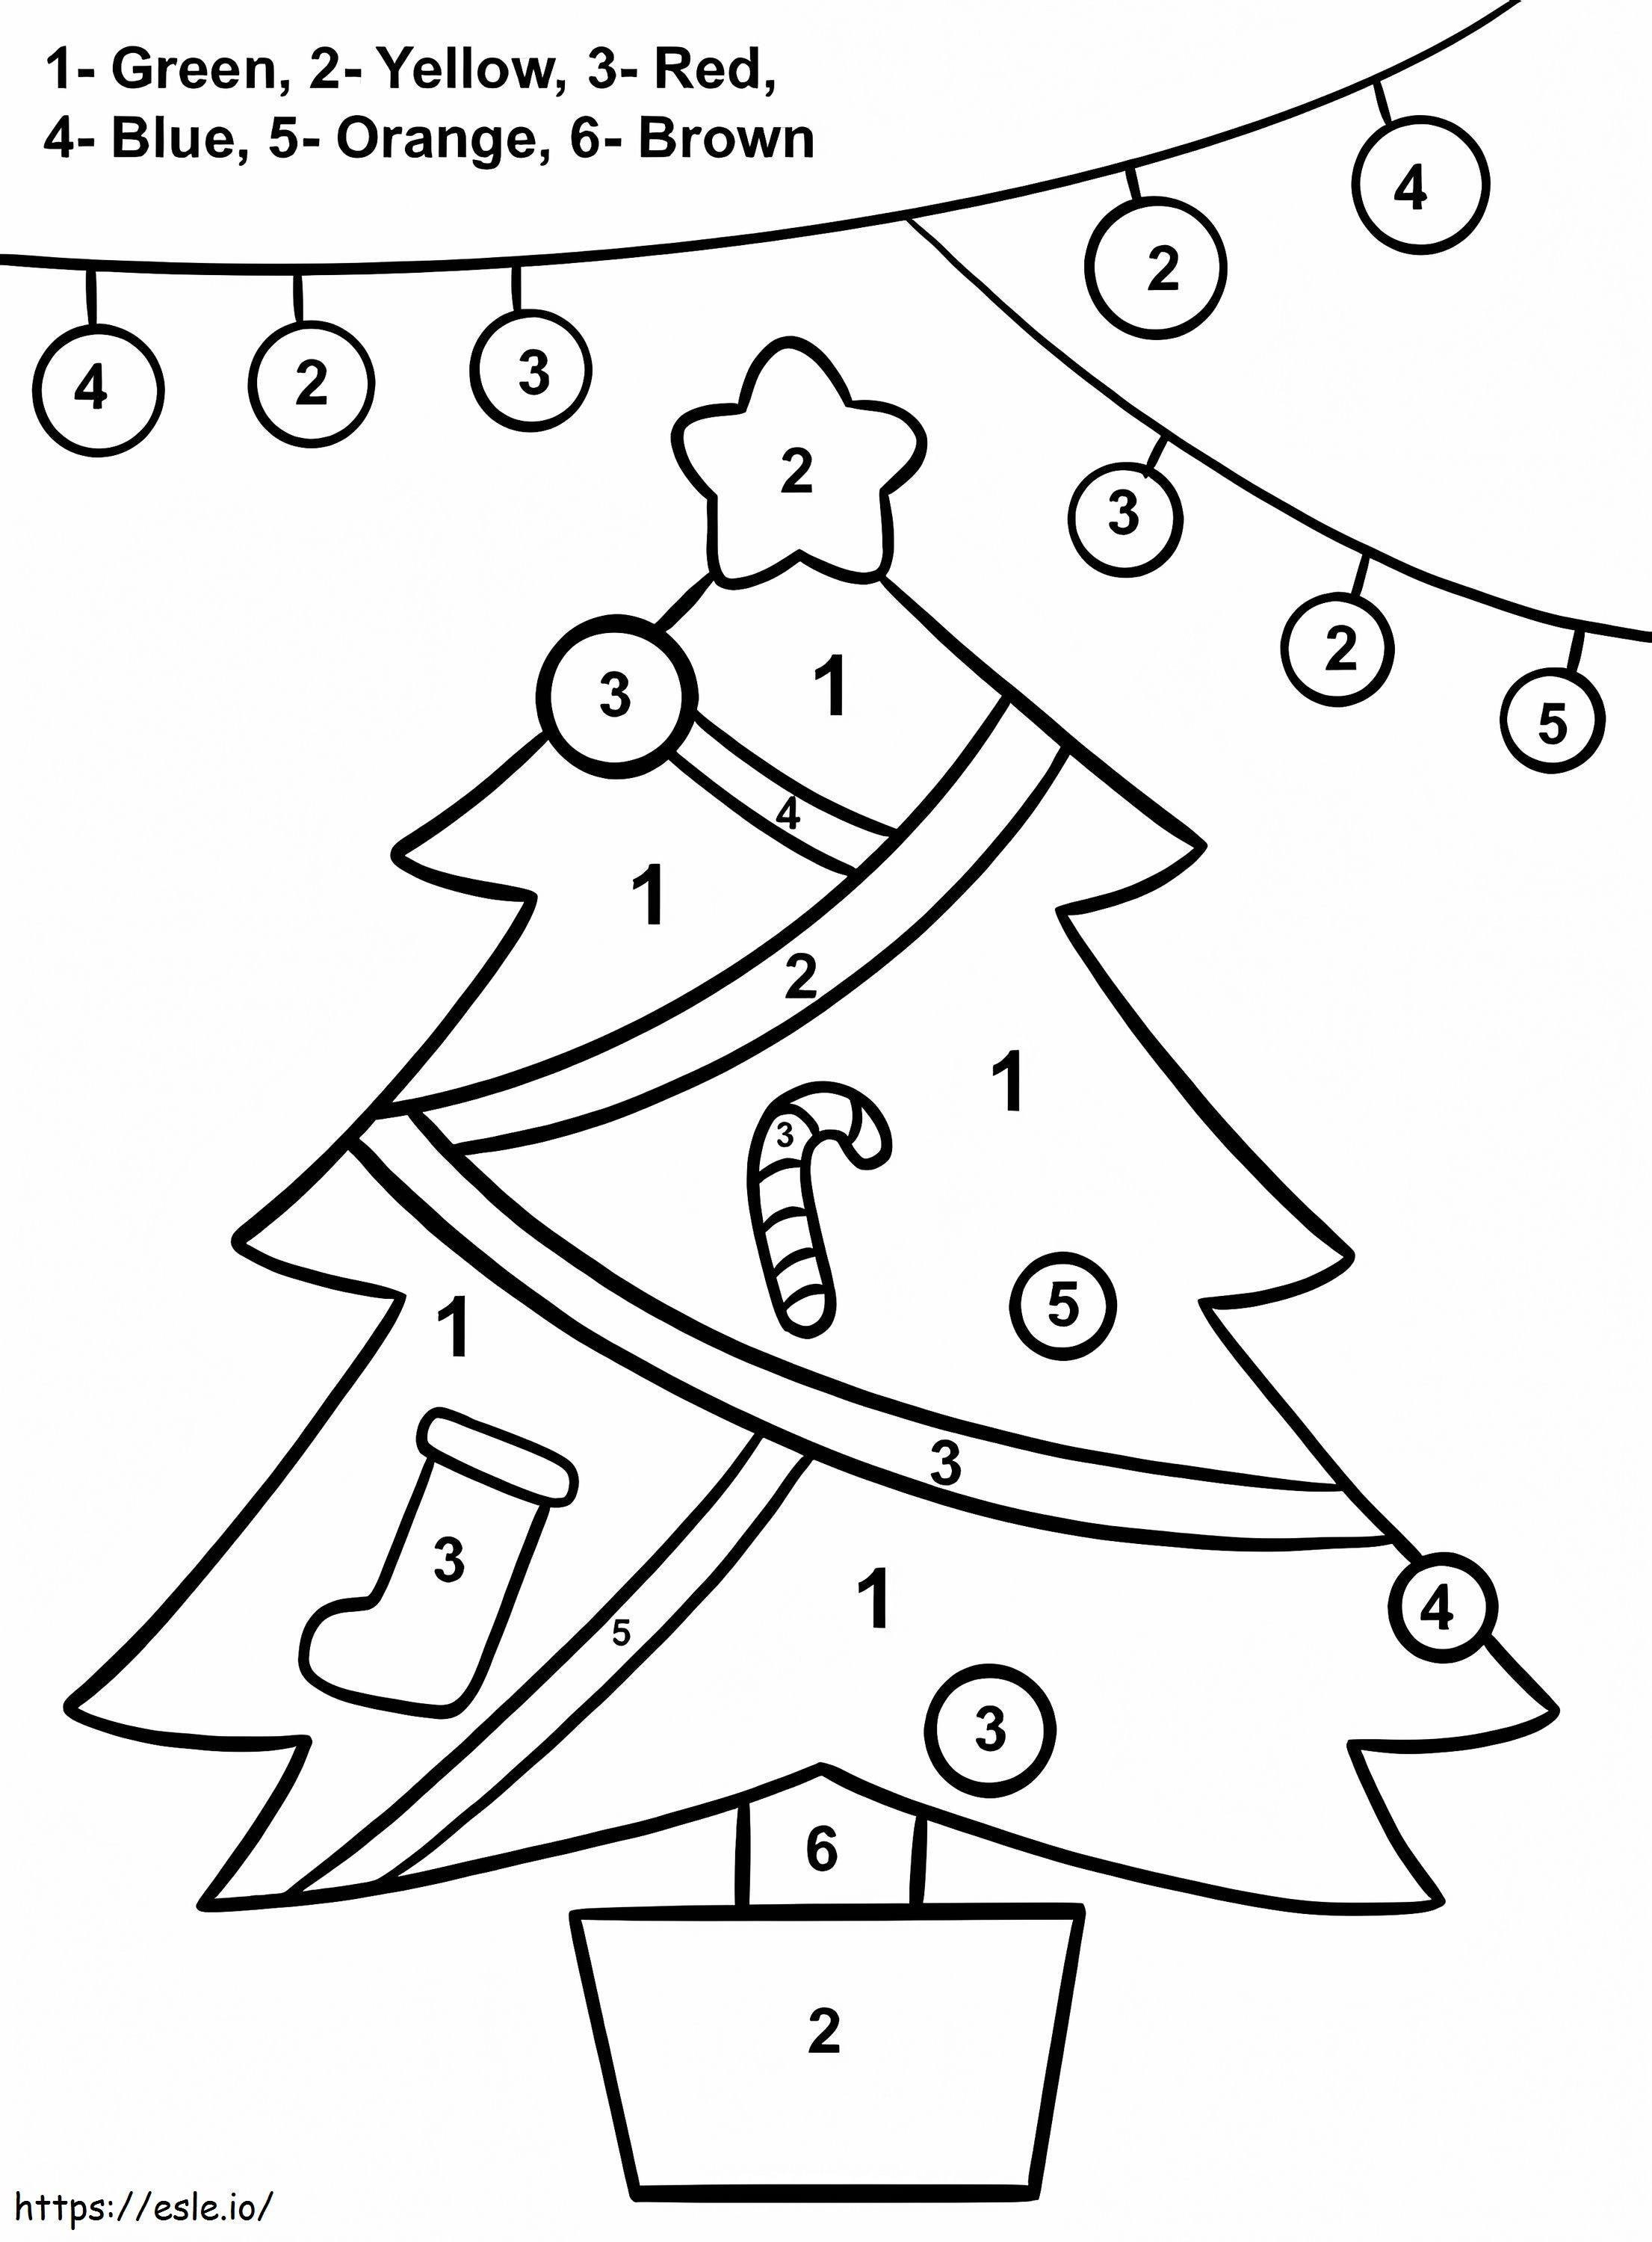 Cool Christmas Tree Color By Number coloring page